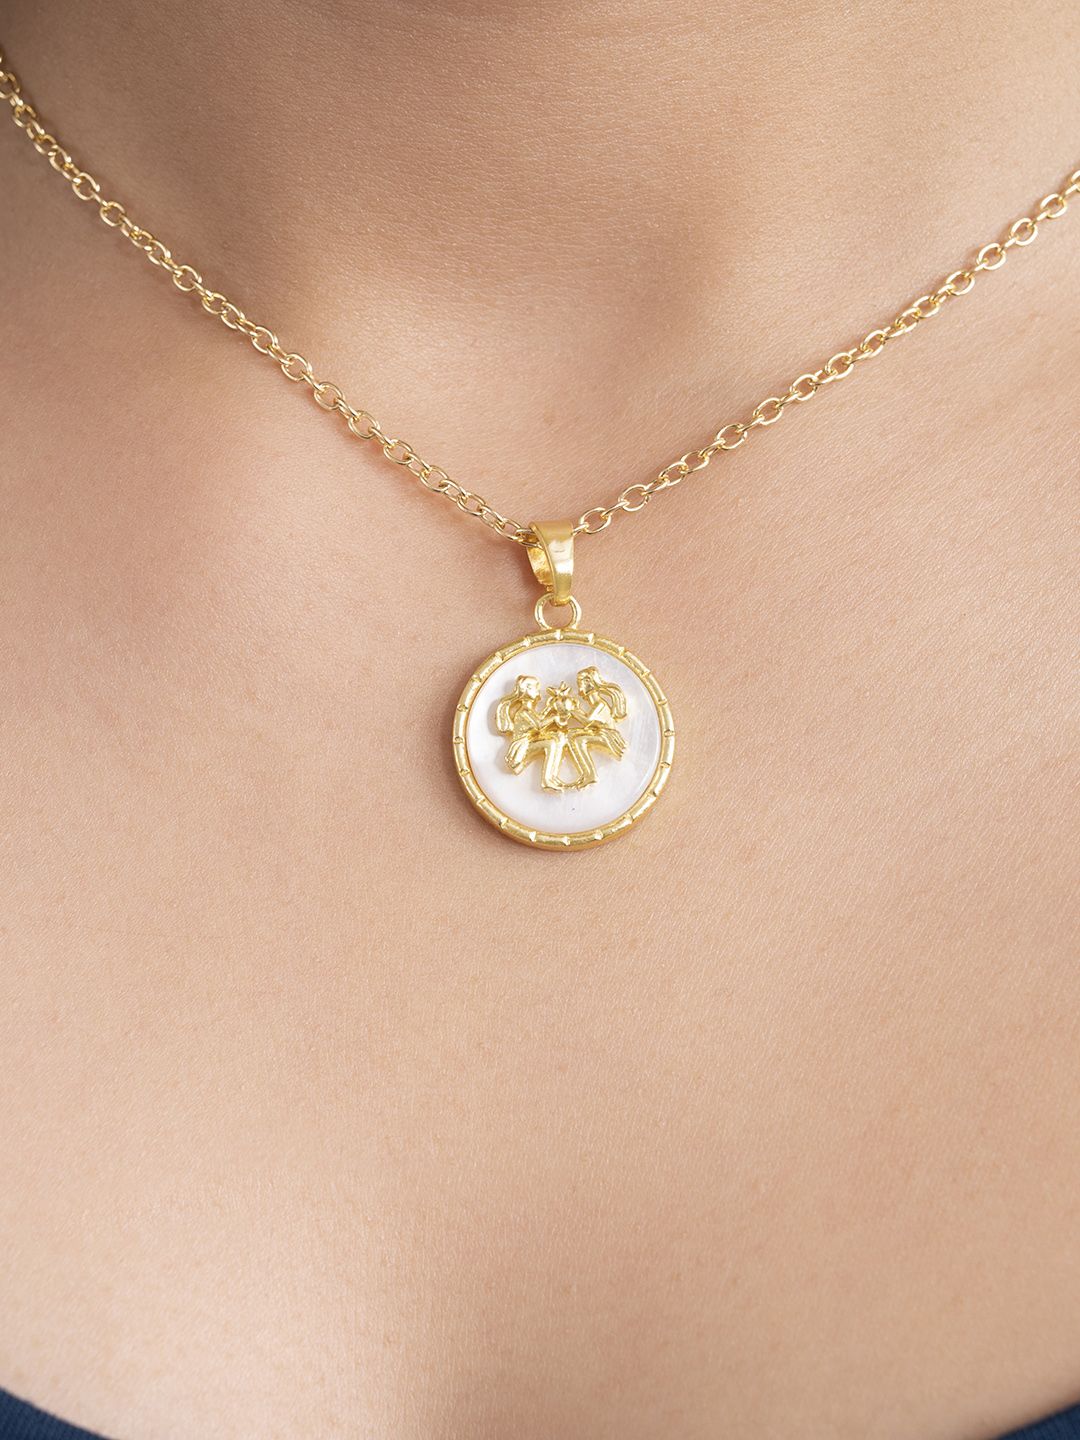 Mikoto by FableStreet 18K Gold-Plated & White Mother of Pearl Gemini Zodiac Necklace Price in India